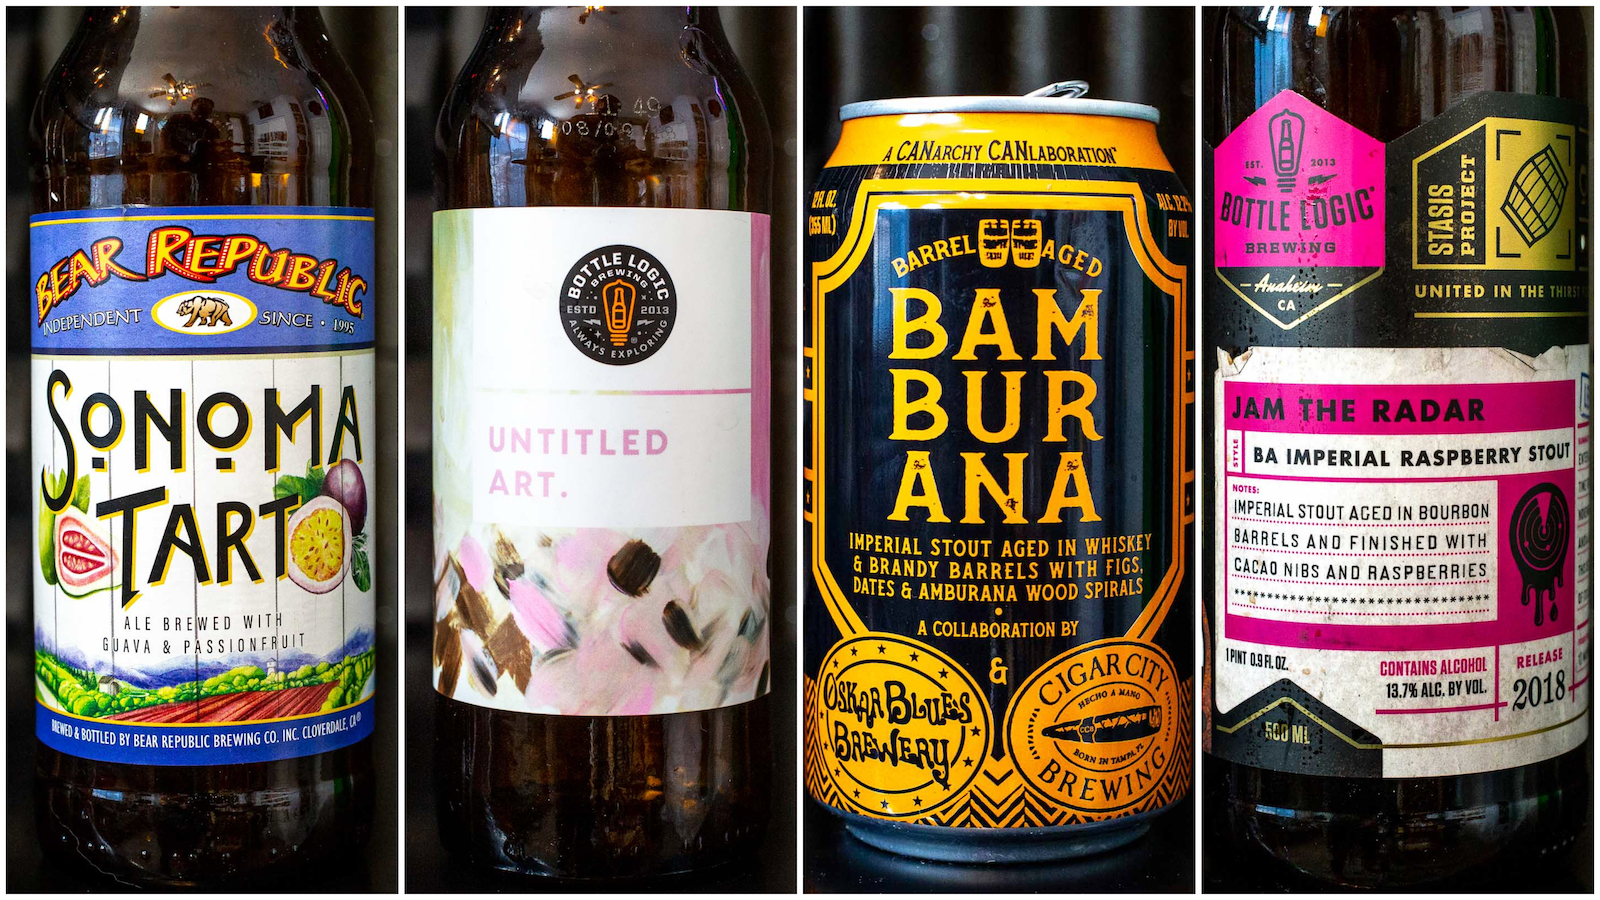 Pictured: Beers from Bear Republic, Oskar Blues, Untitled Art, and Bottle Logic Brewing.